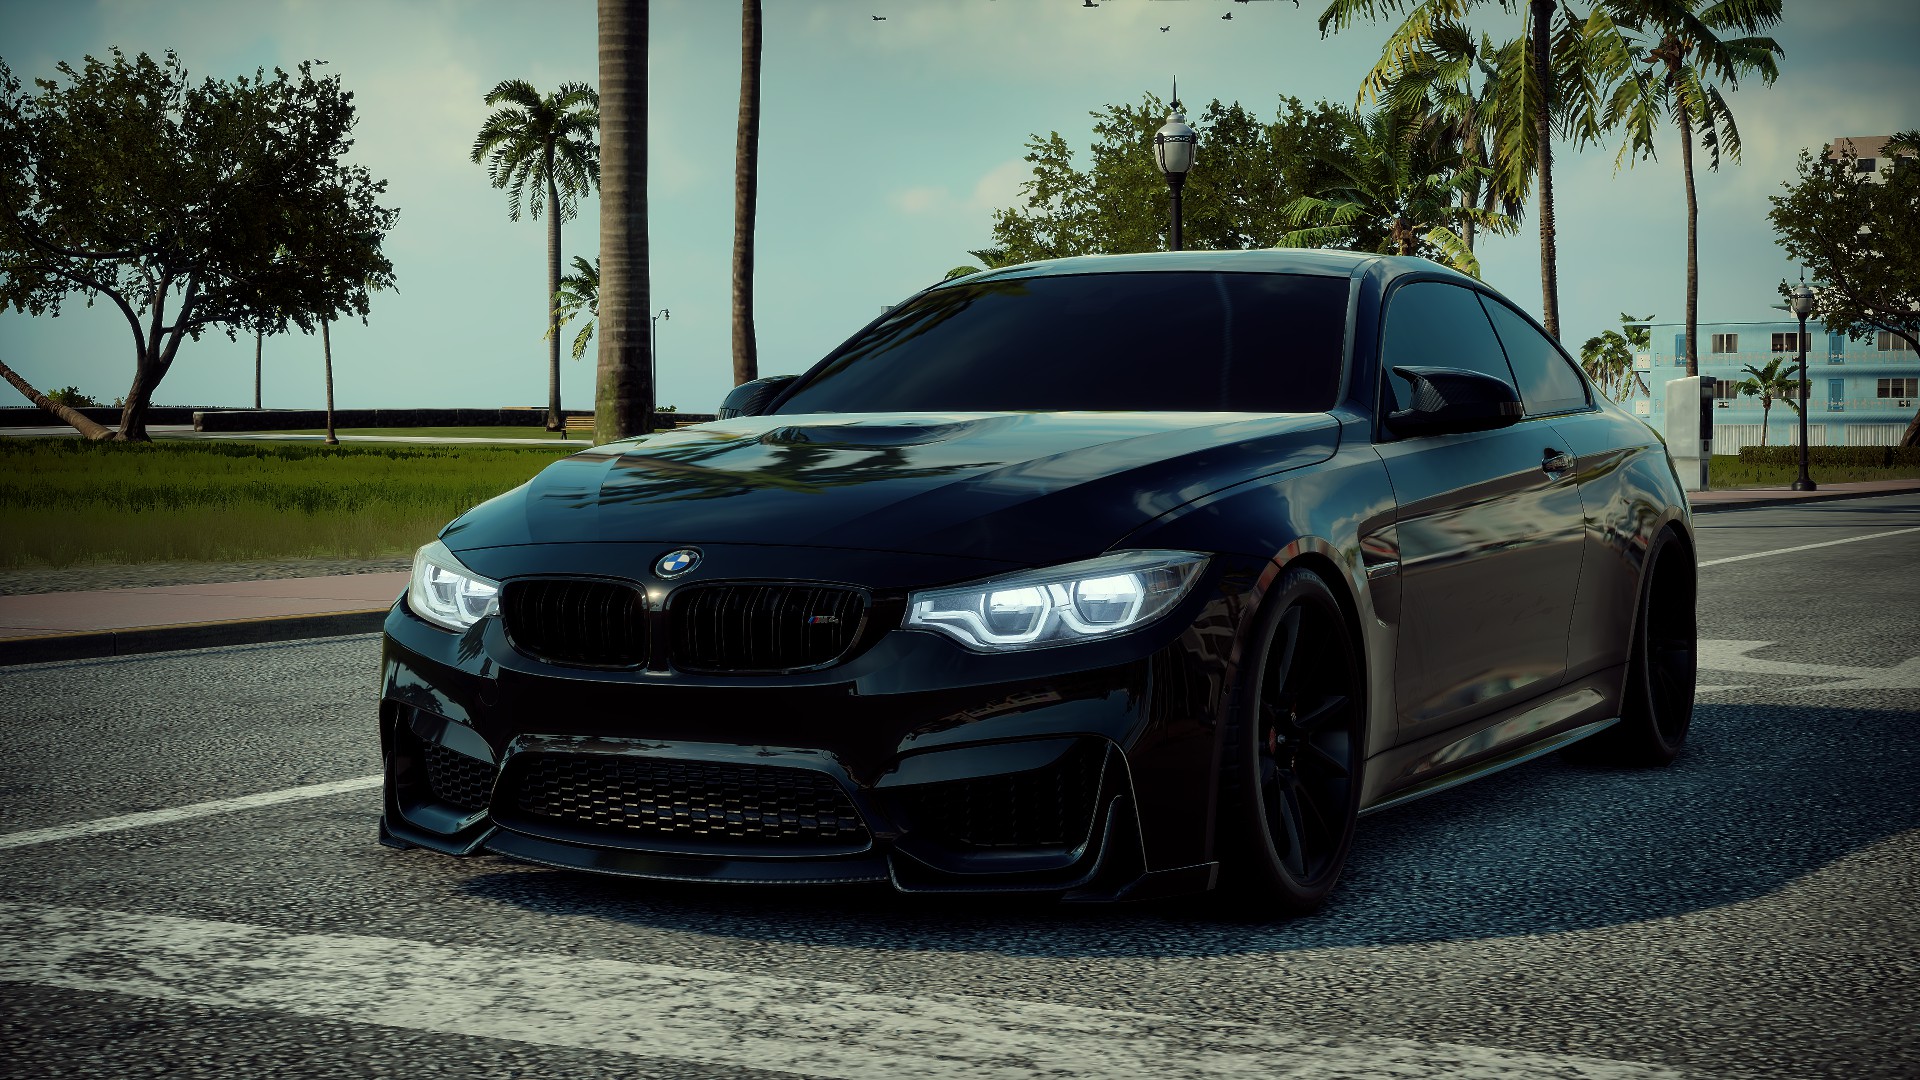 General 1920x1080 BMW palm trees street view car 4K Need for Speed: Heat city BMW M4 German cars video games Electronic Arts BMW F80/F82/F83